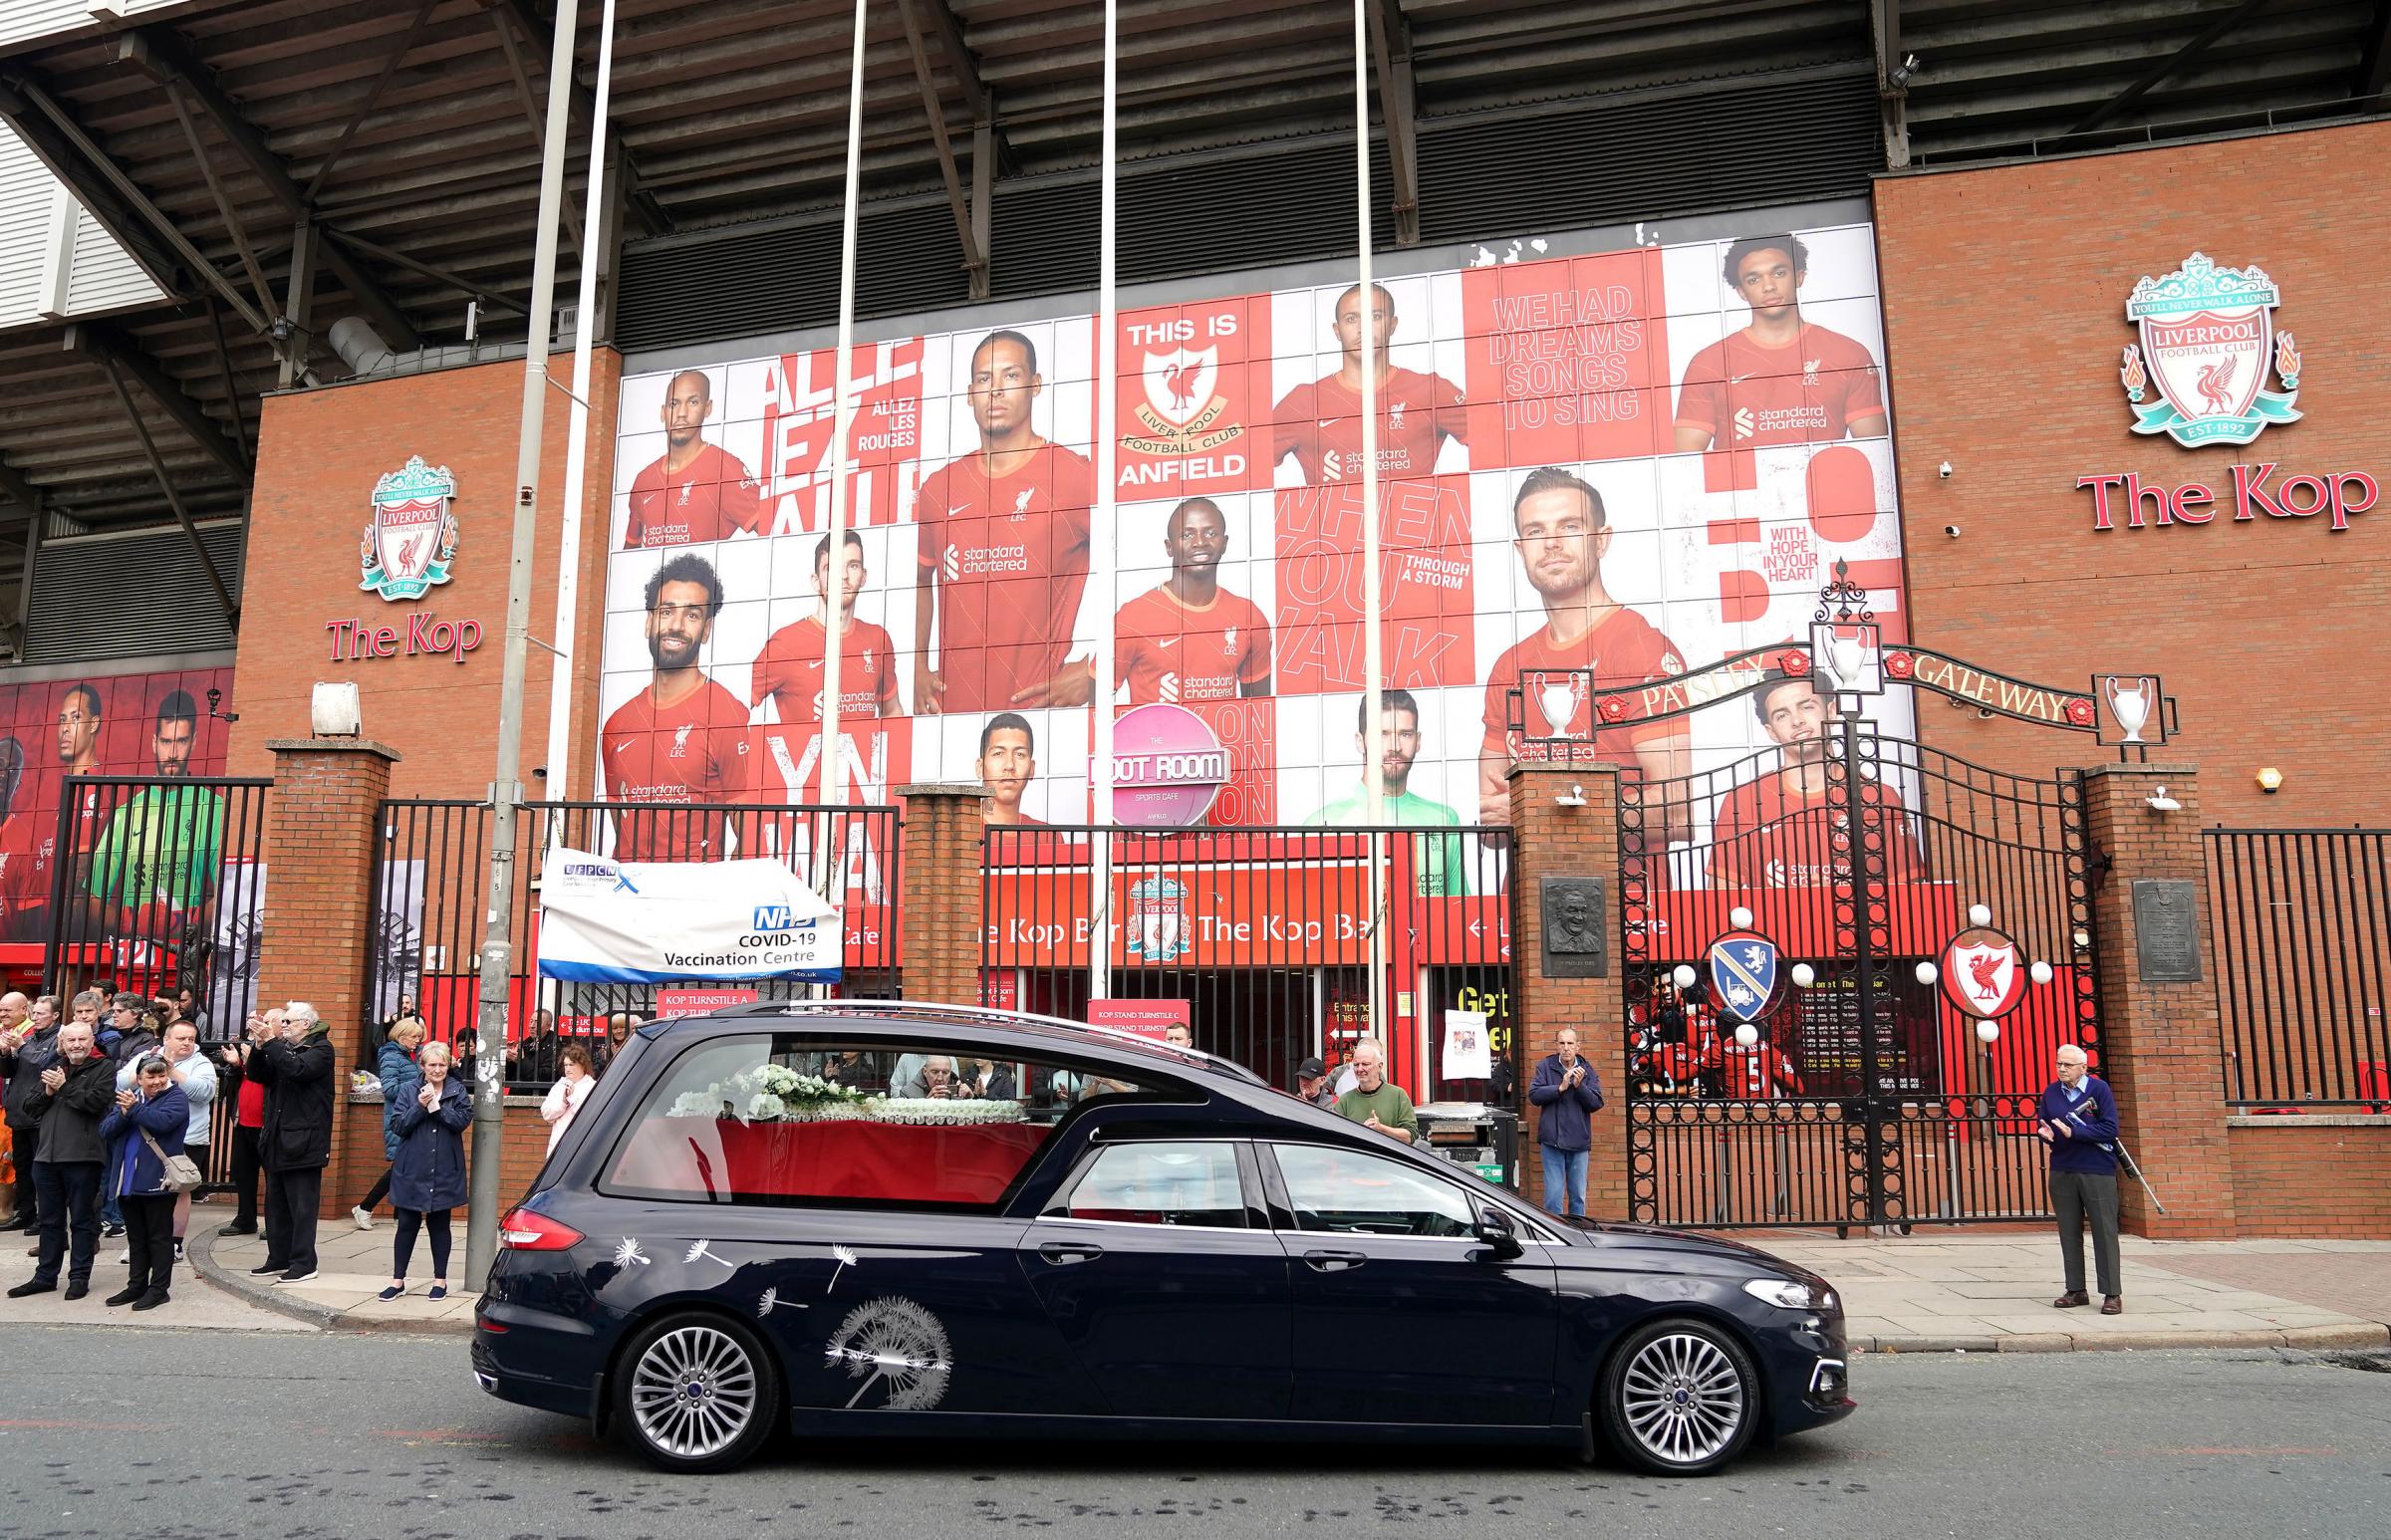 Fans gather outside Anfield to bid a final farewell to Roger Hunt. Pictures by Mike Egerton/PA Wire